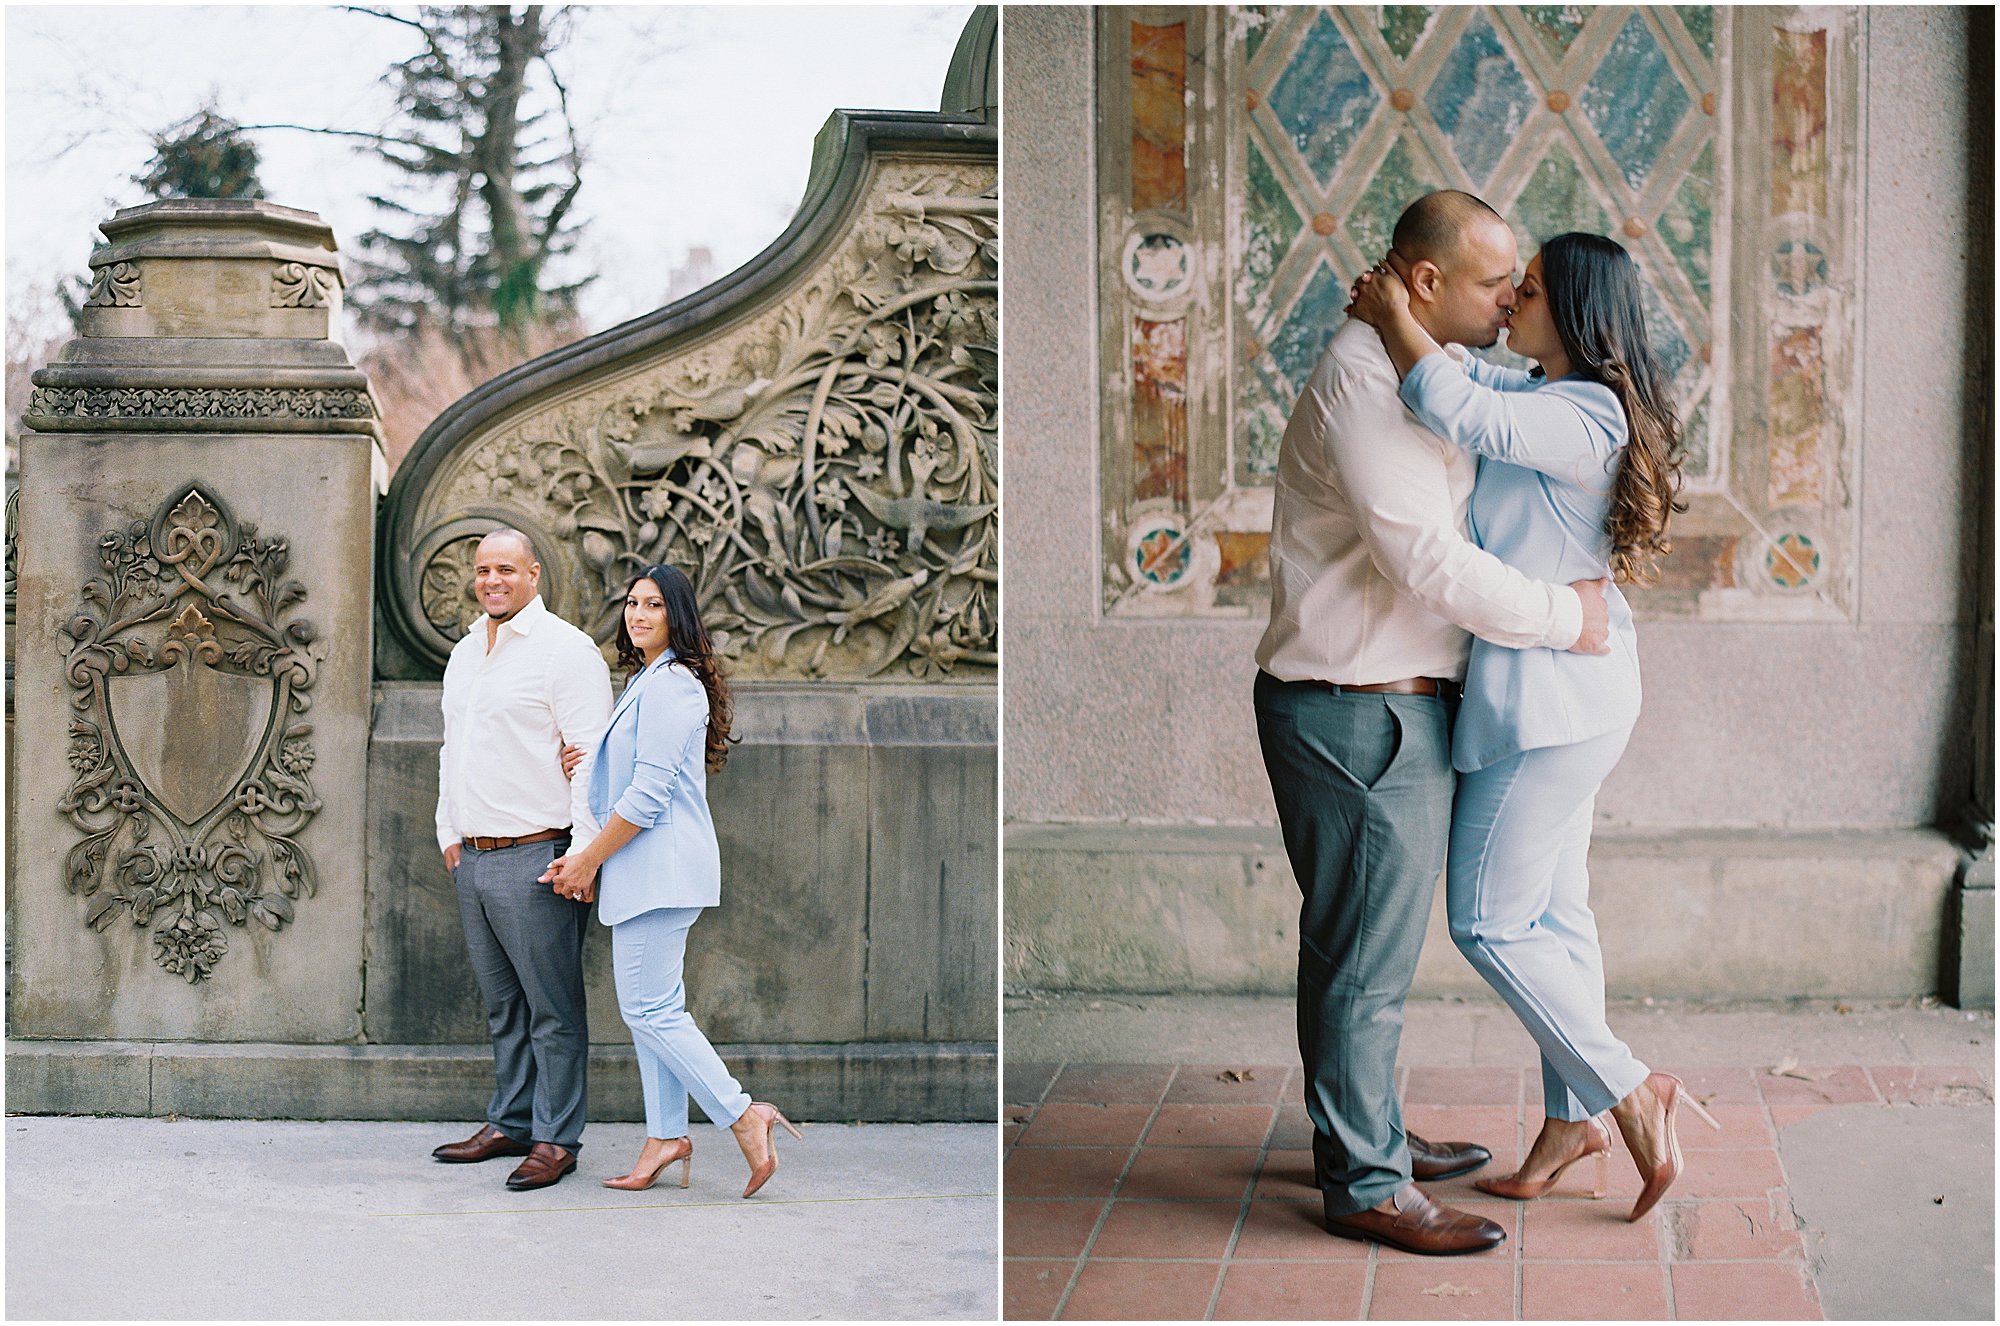 Winter Chic Central Park, NY Engagement Session